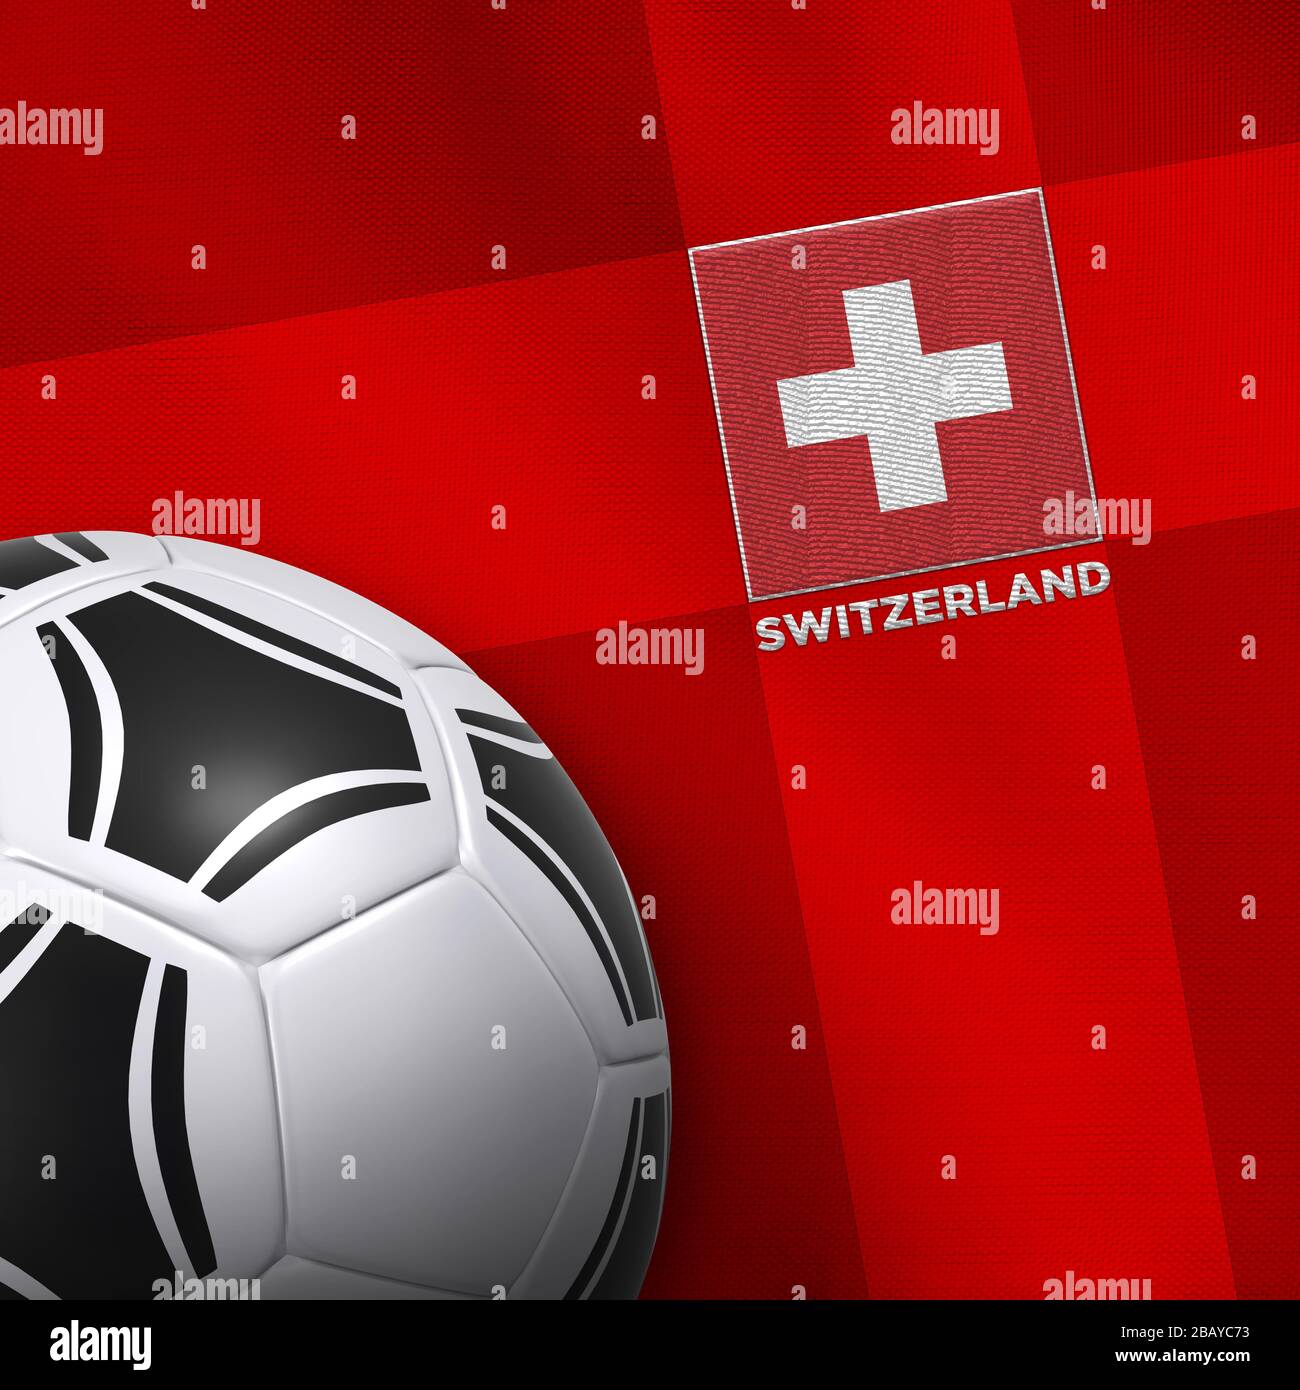 Swiss National Football Team High Resolution Stock Photography and Images -  Alamy